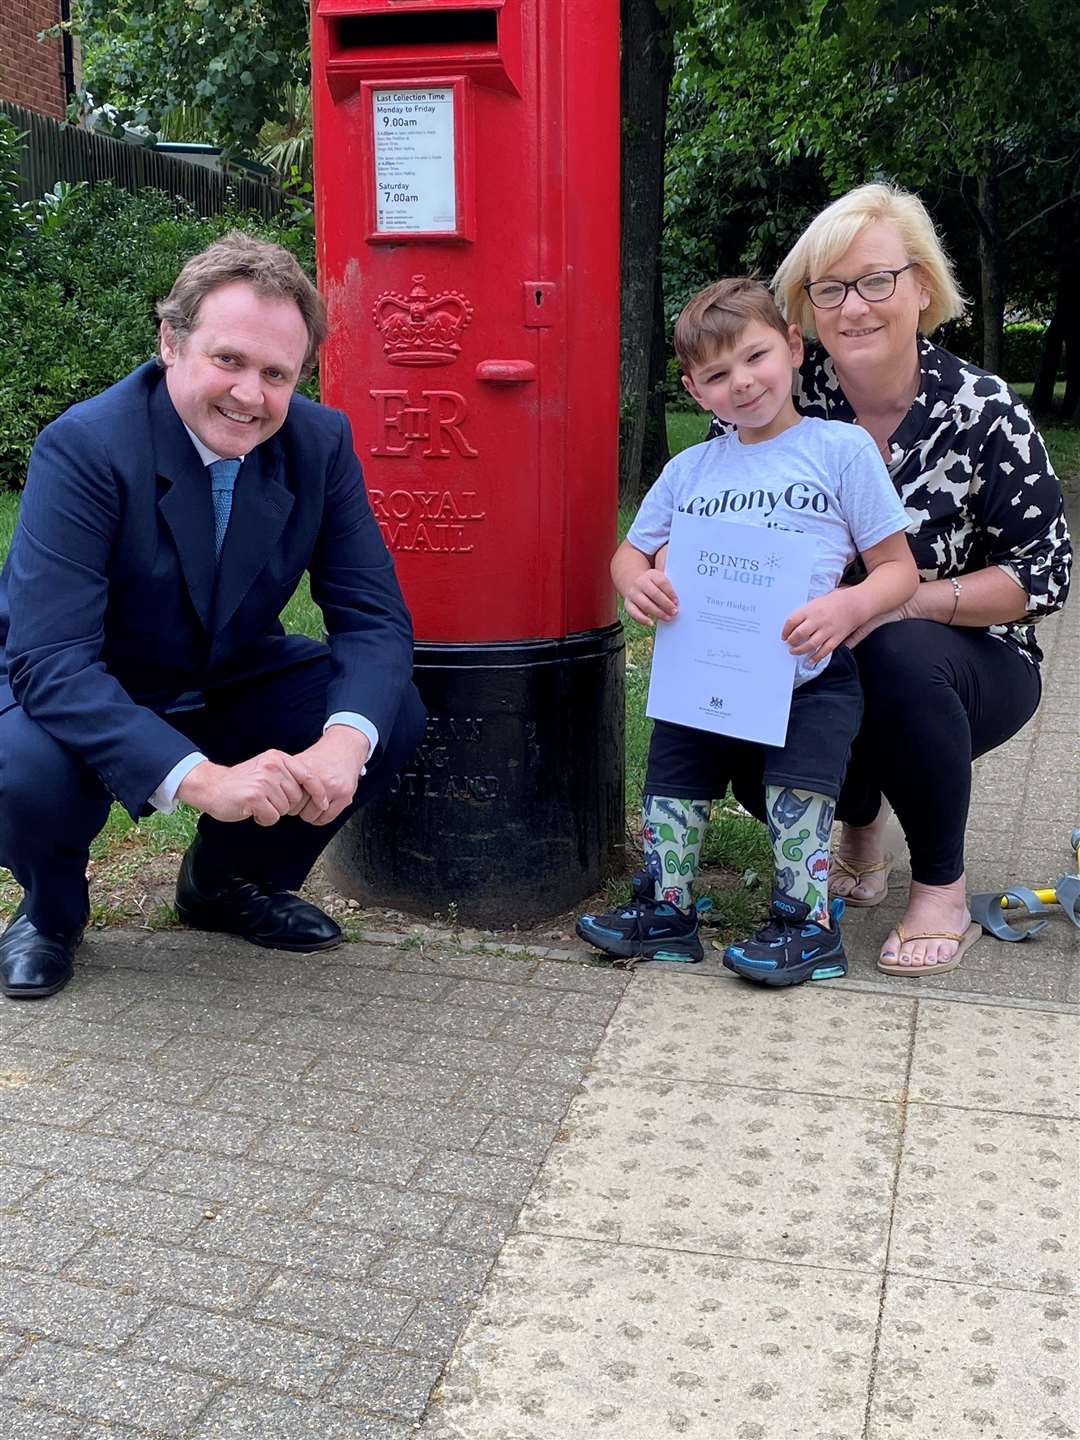 MP Tom Tugendhat helped Tony and his adoptive family campaigner for tougher laws for child abusers